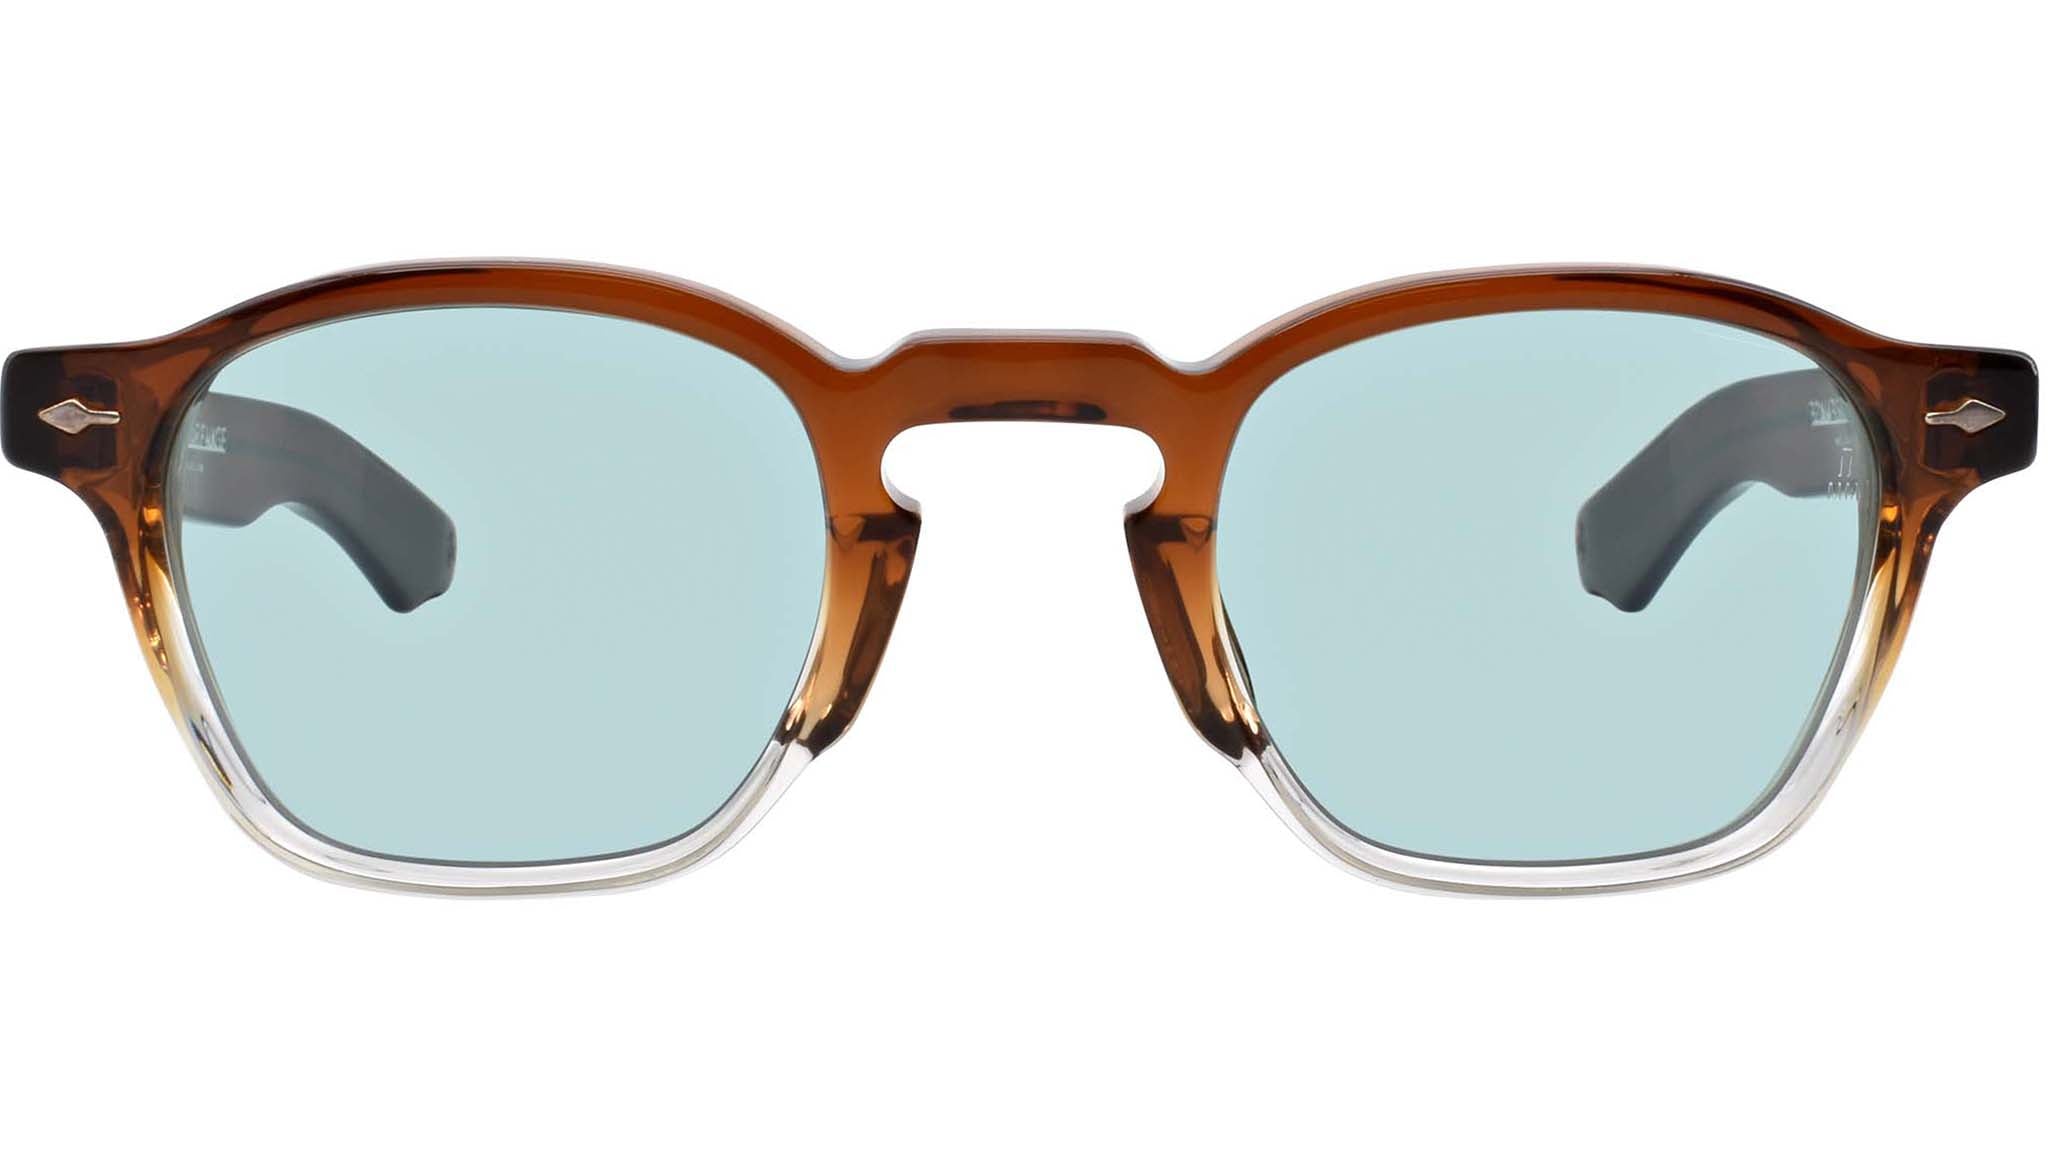 Jacques Marie Mage Zephirin 47 Hickory Fade Sunglasses